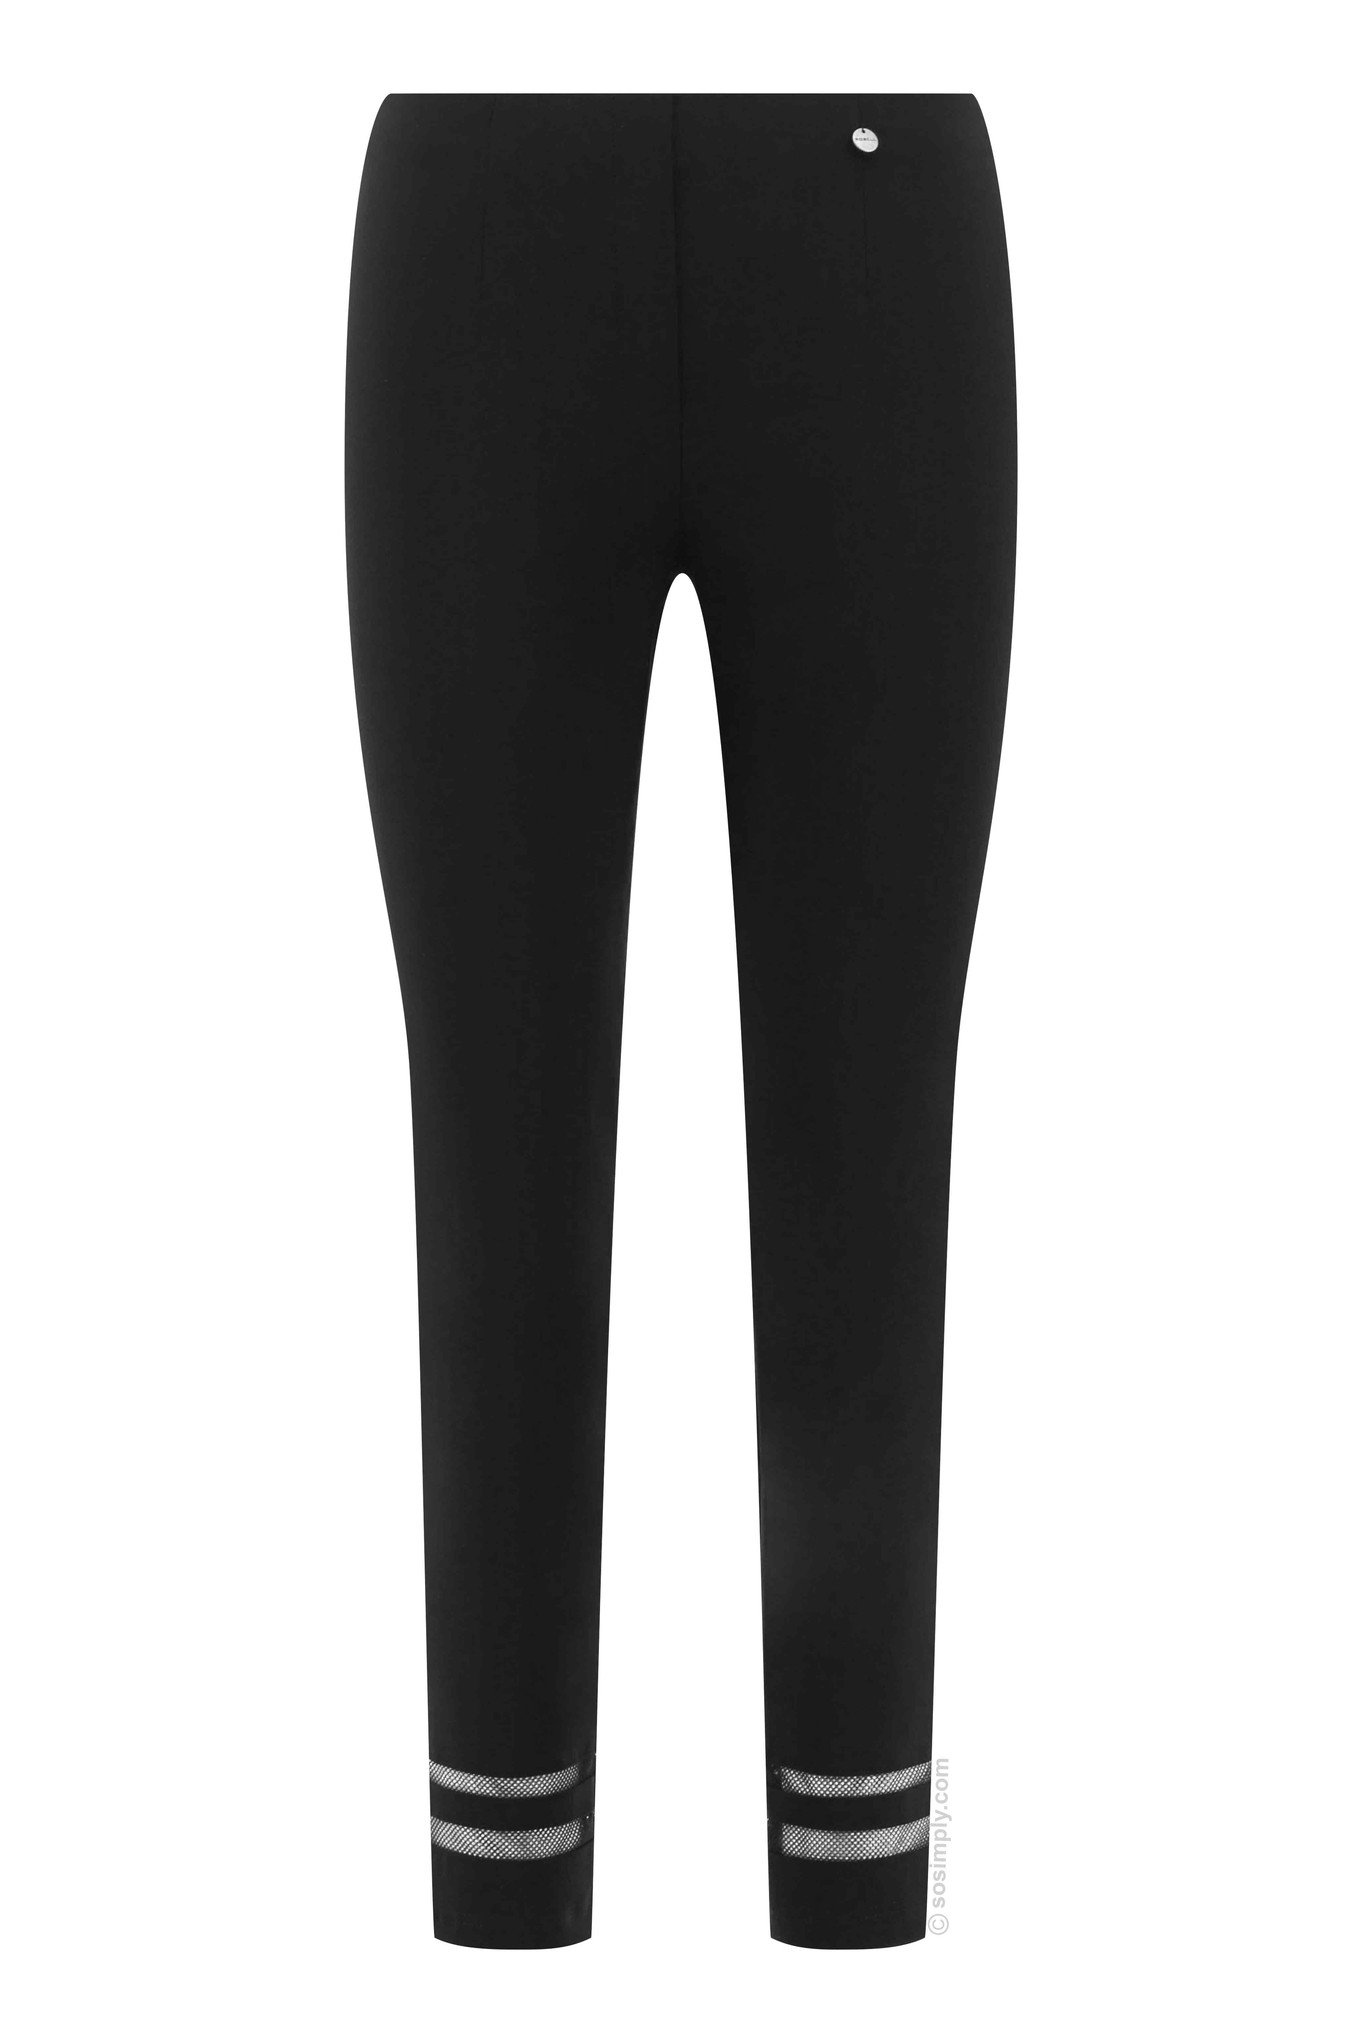 Robell Marie 09 Trousers - Free Delivery | So Simply